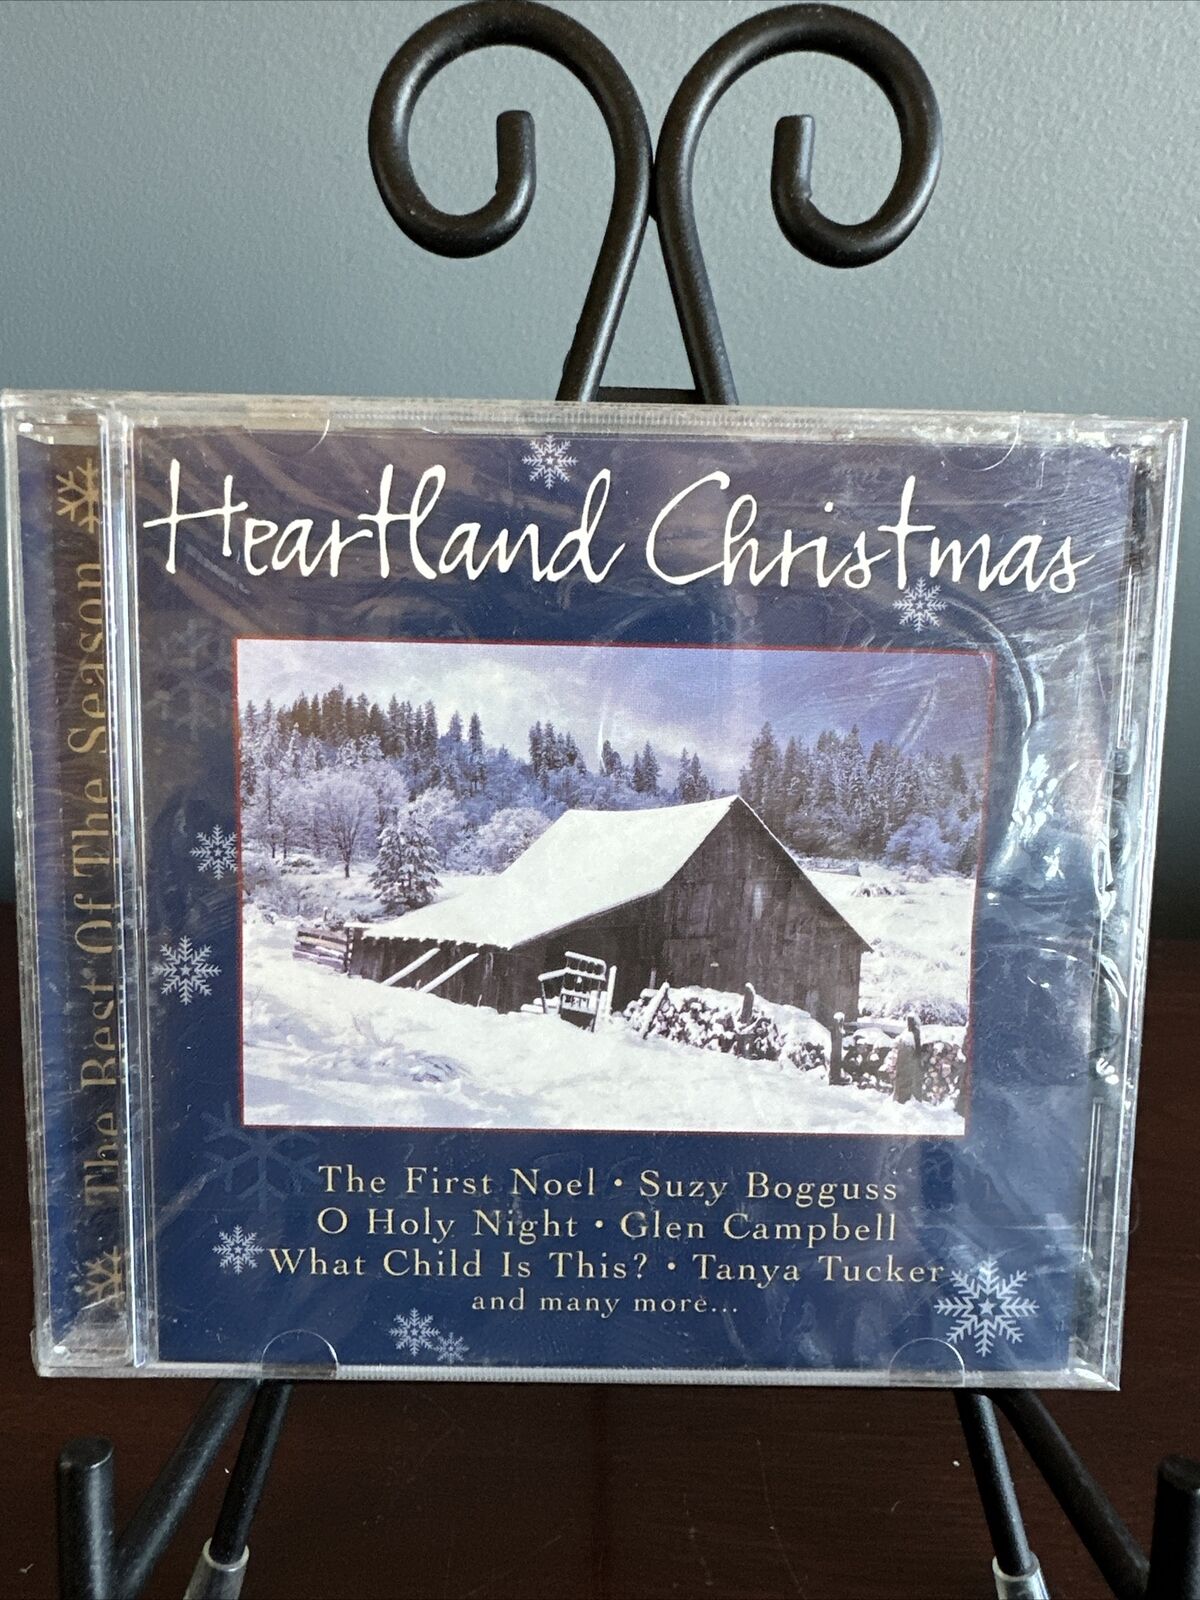 Heartland Christmas by Various Artists (CD, Sep-2001, Direct Source) BRAND NEW